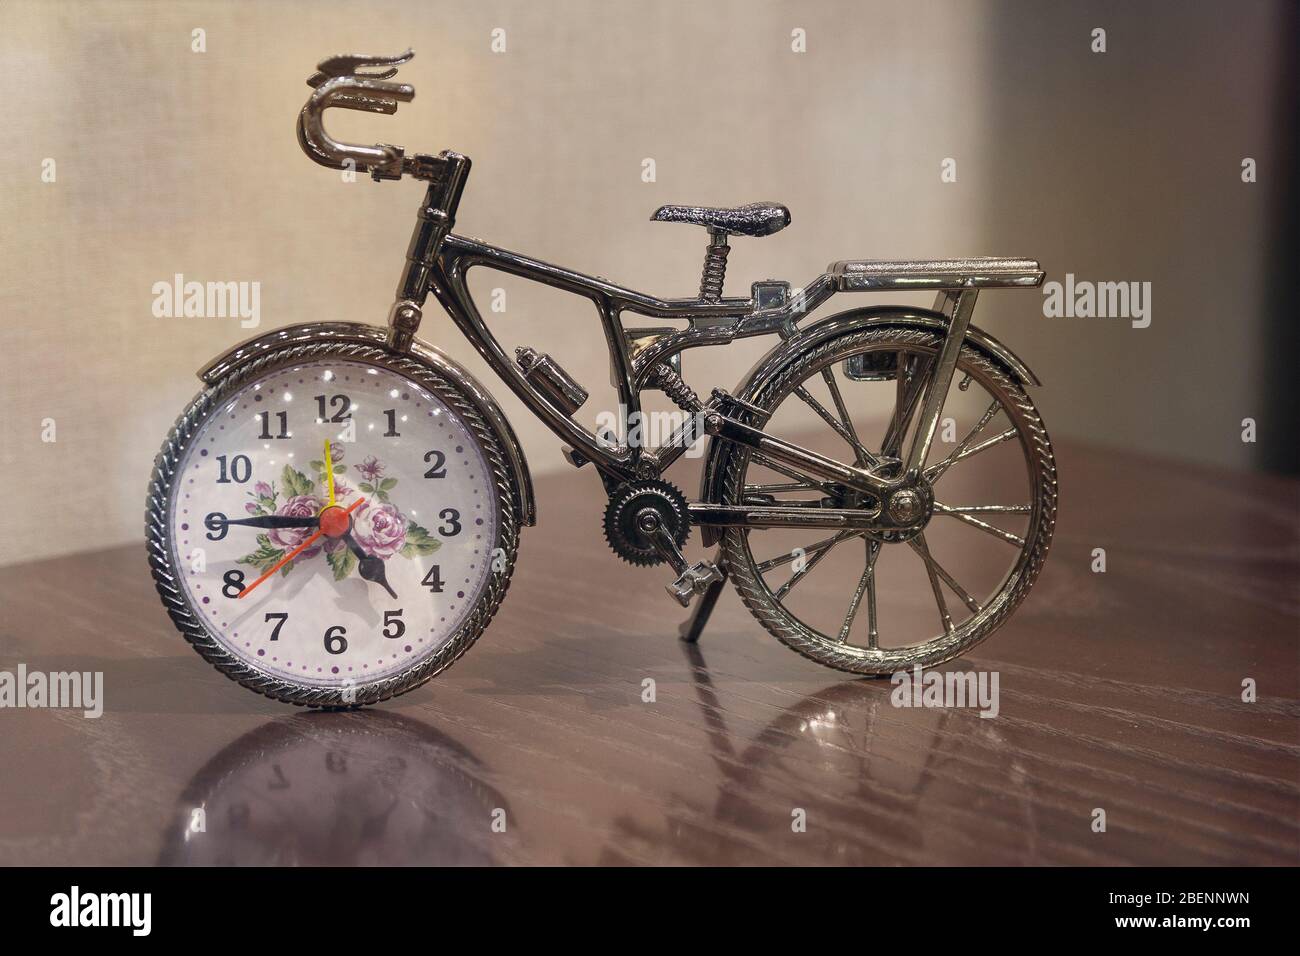 Clock and bicycle of the table. Interior Stock Photo